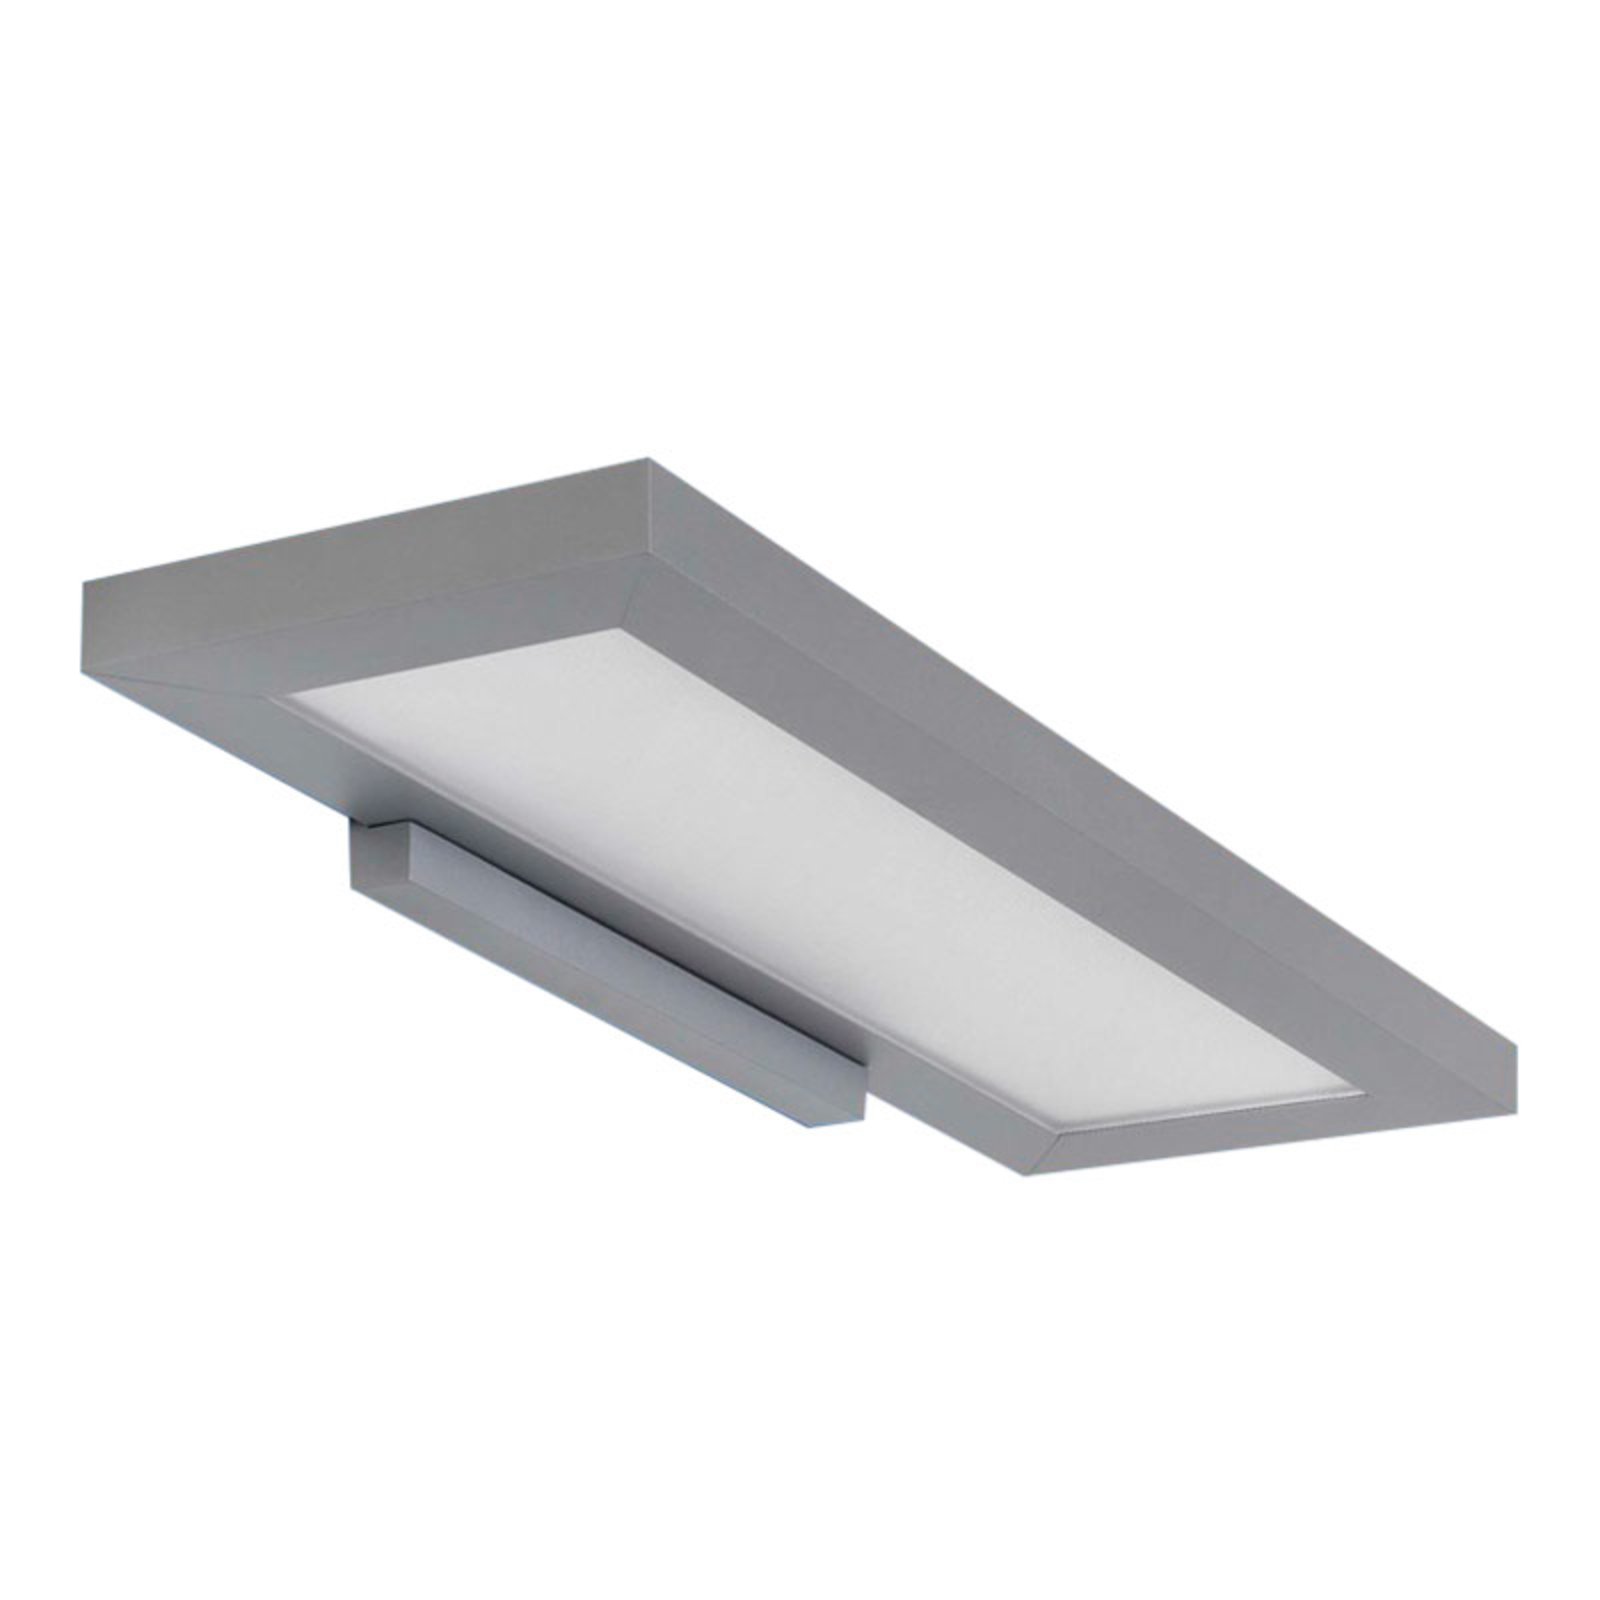 LED wall light CWP with opal panel, 30 W